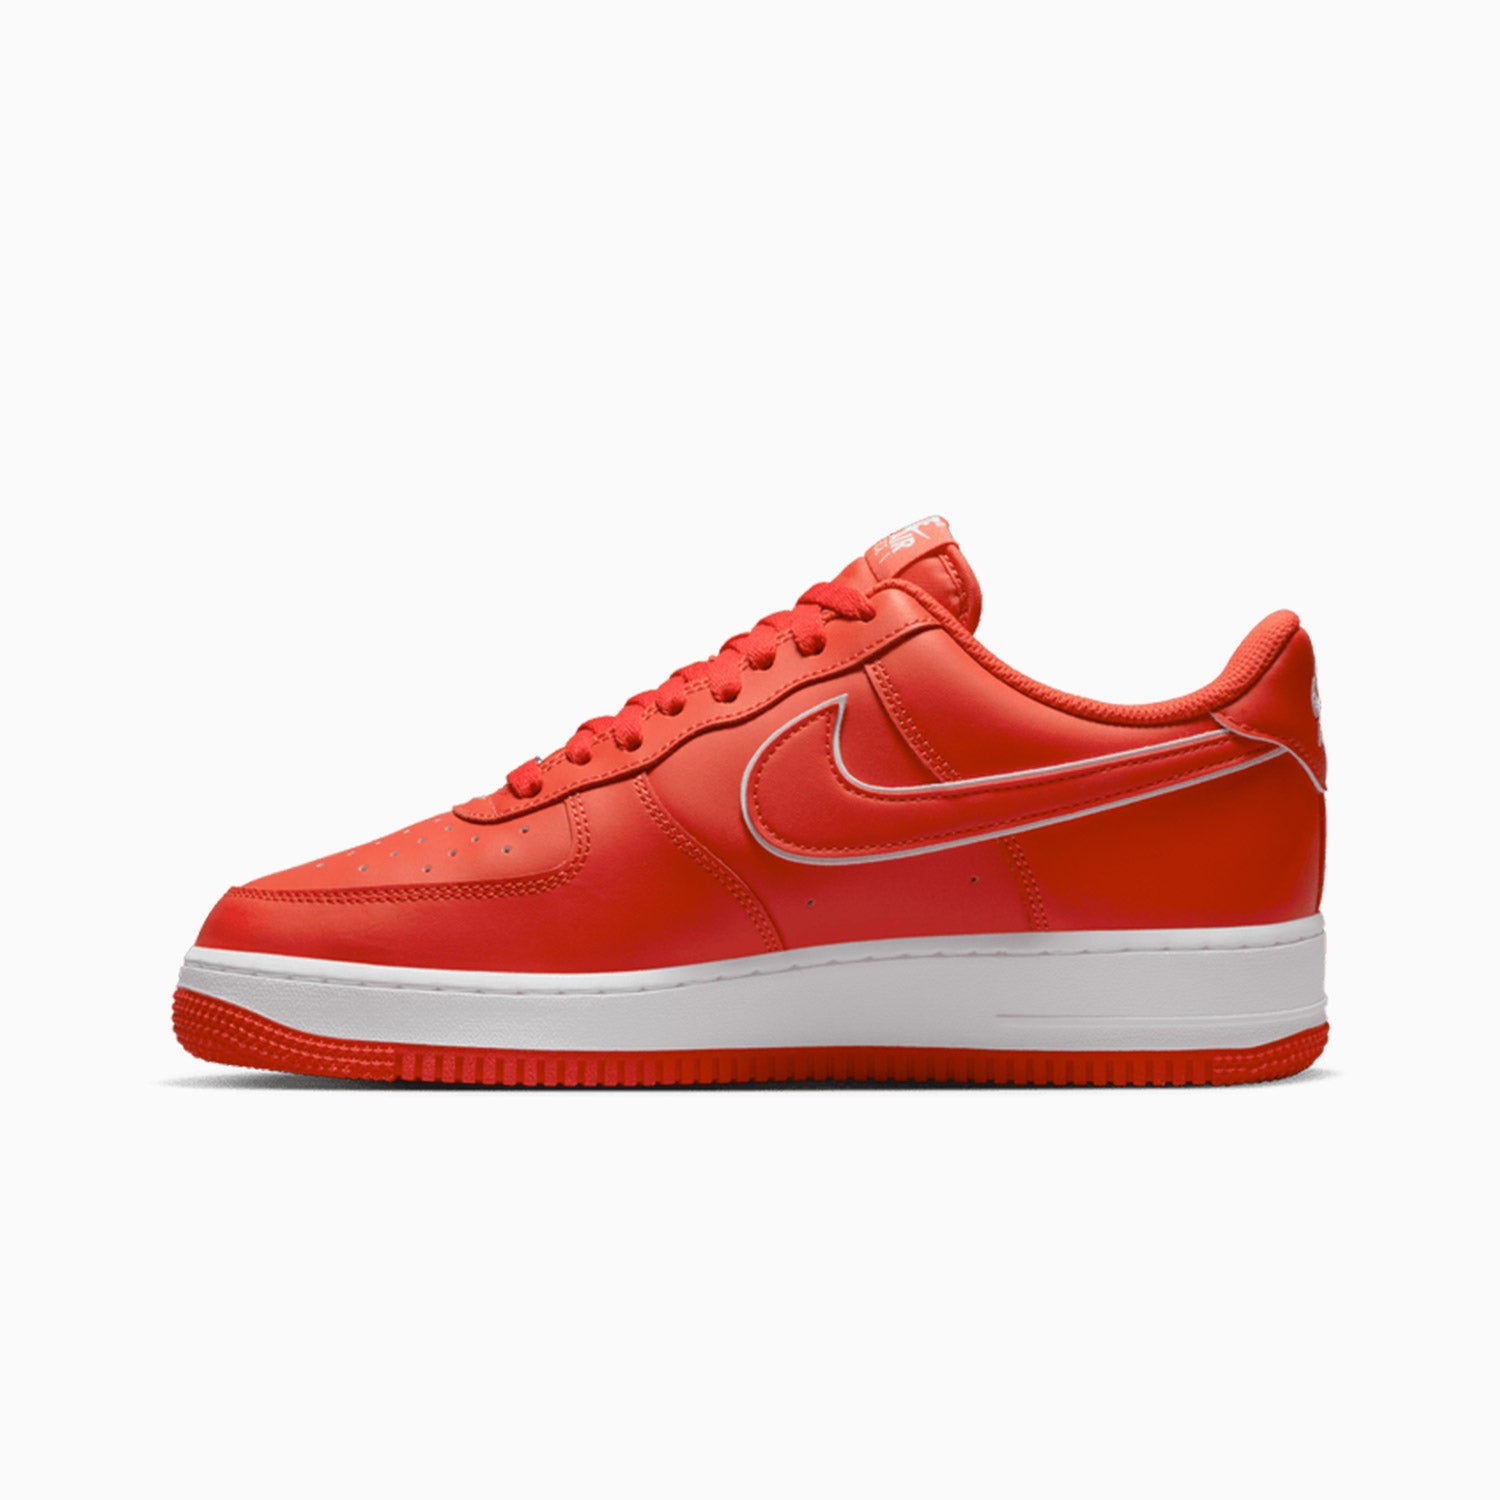 nike-mens-nike-air-force-1-07-picante-red-shoes-dv0788-600